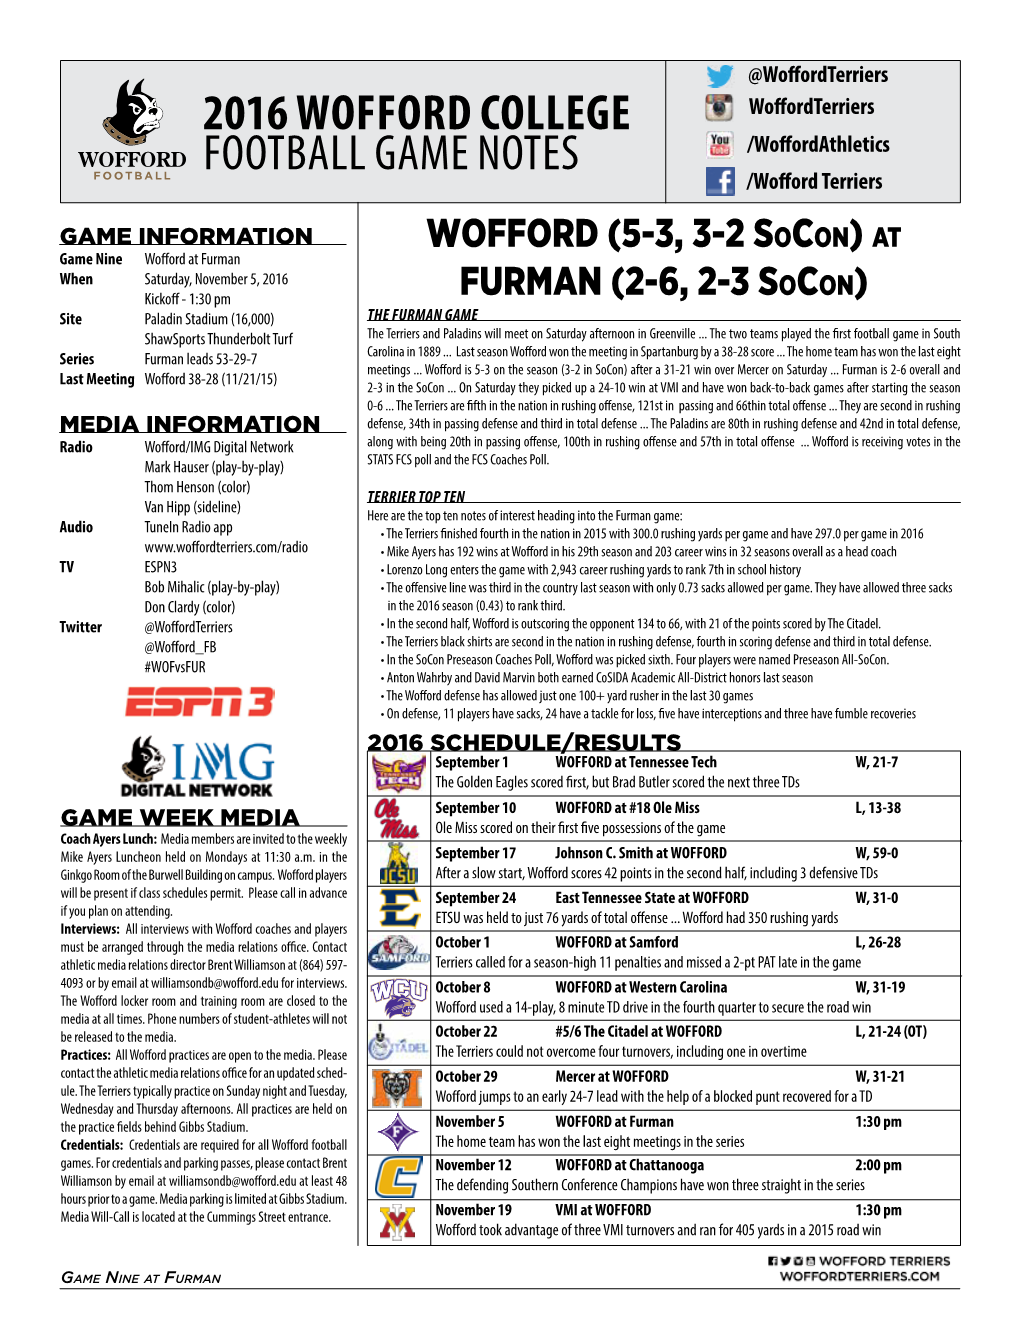 2016 Wofford College Football Game Notes